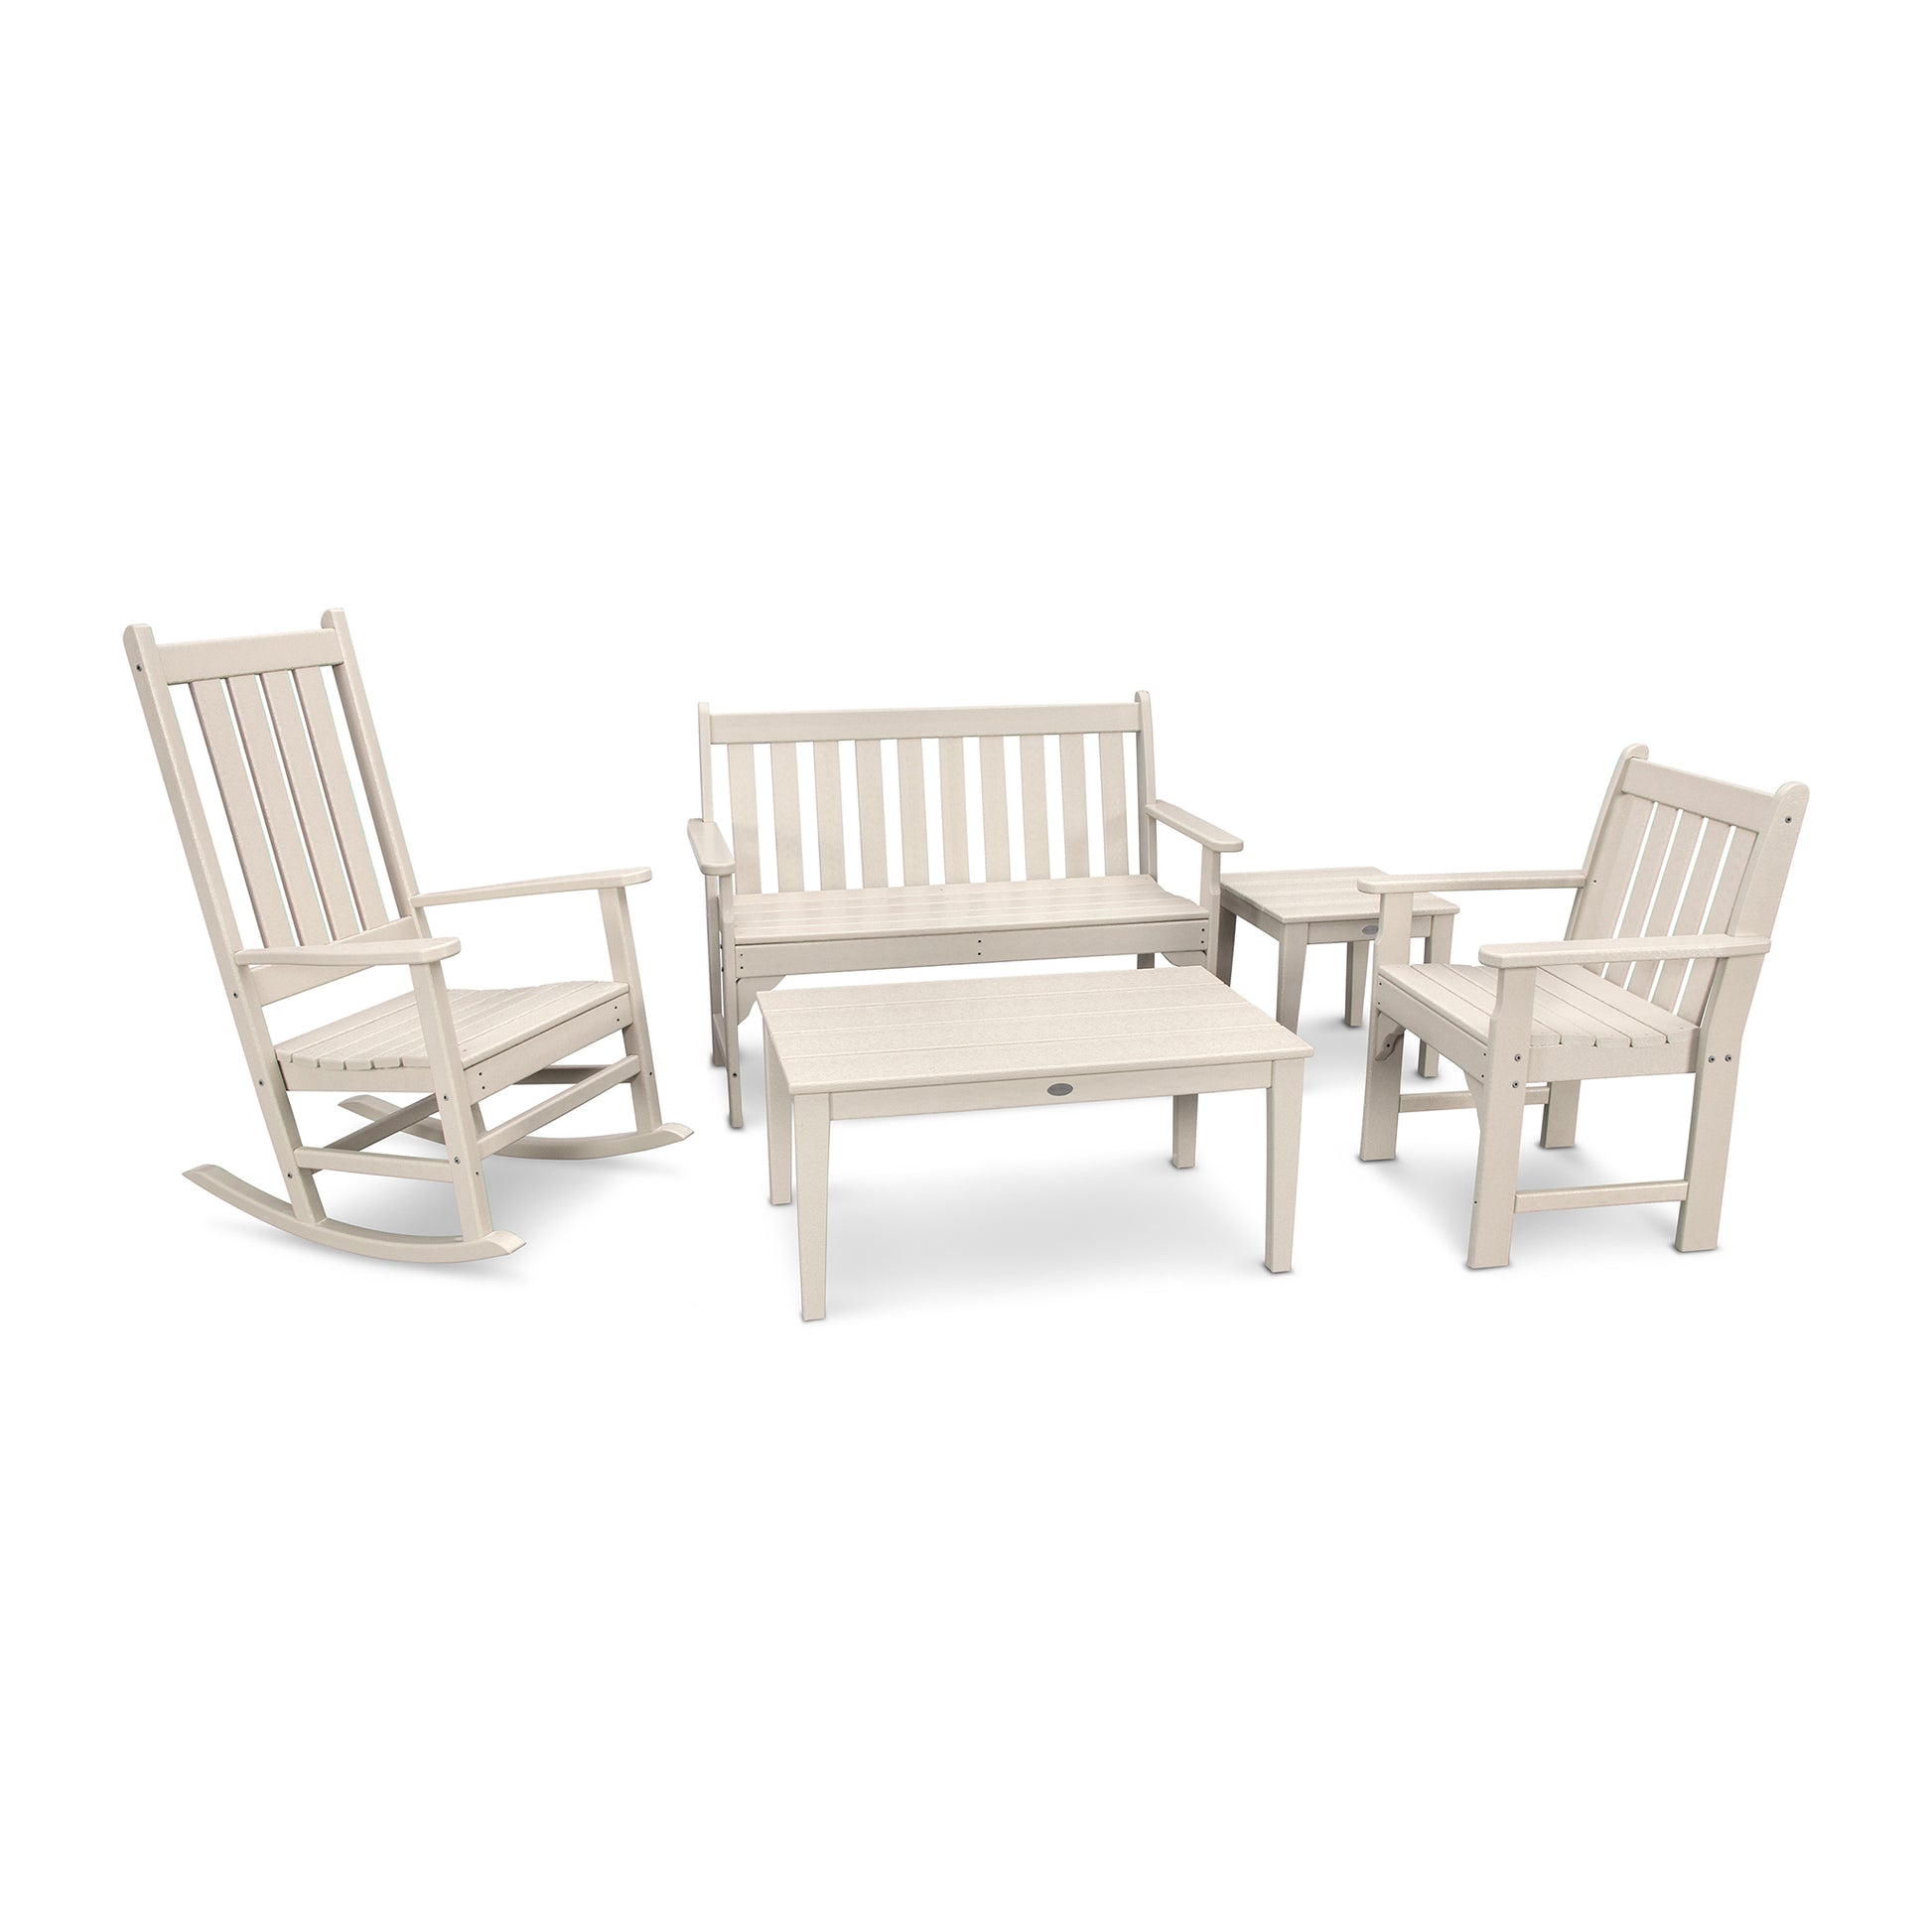 A set of beige POLYWOOD Vineyard 5-Piece Bench & Rocking Chair Set including a rocking chair, a bench, an armchair, and a small rectangular table, all positioned on a plain white background.